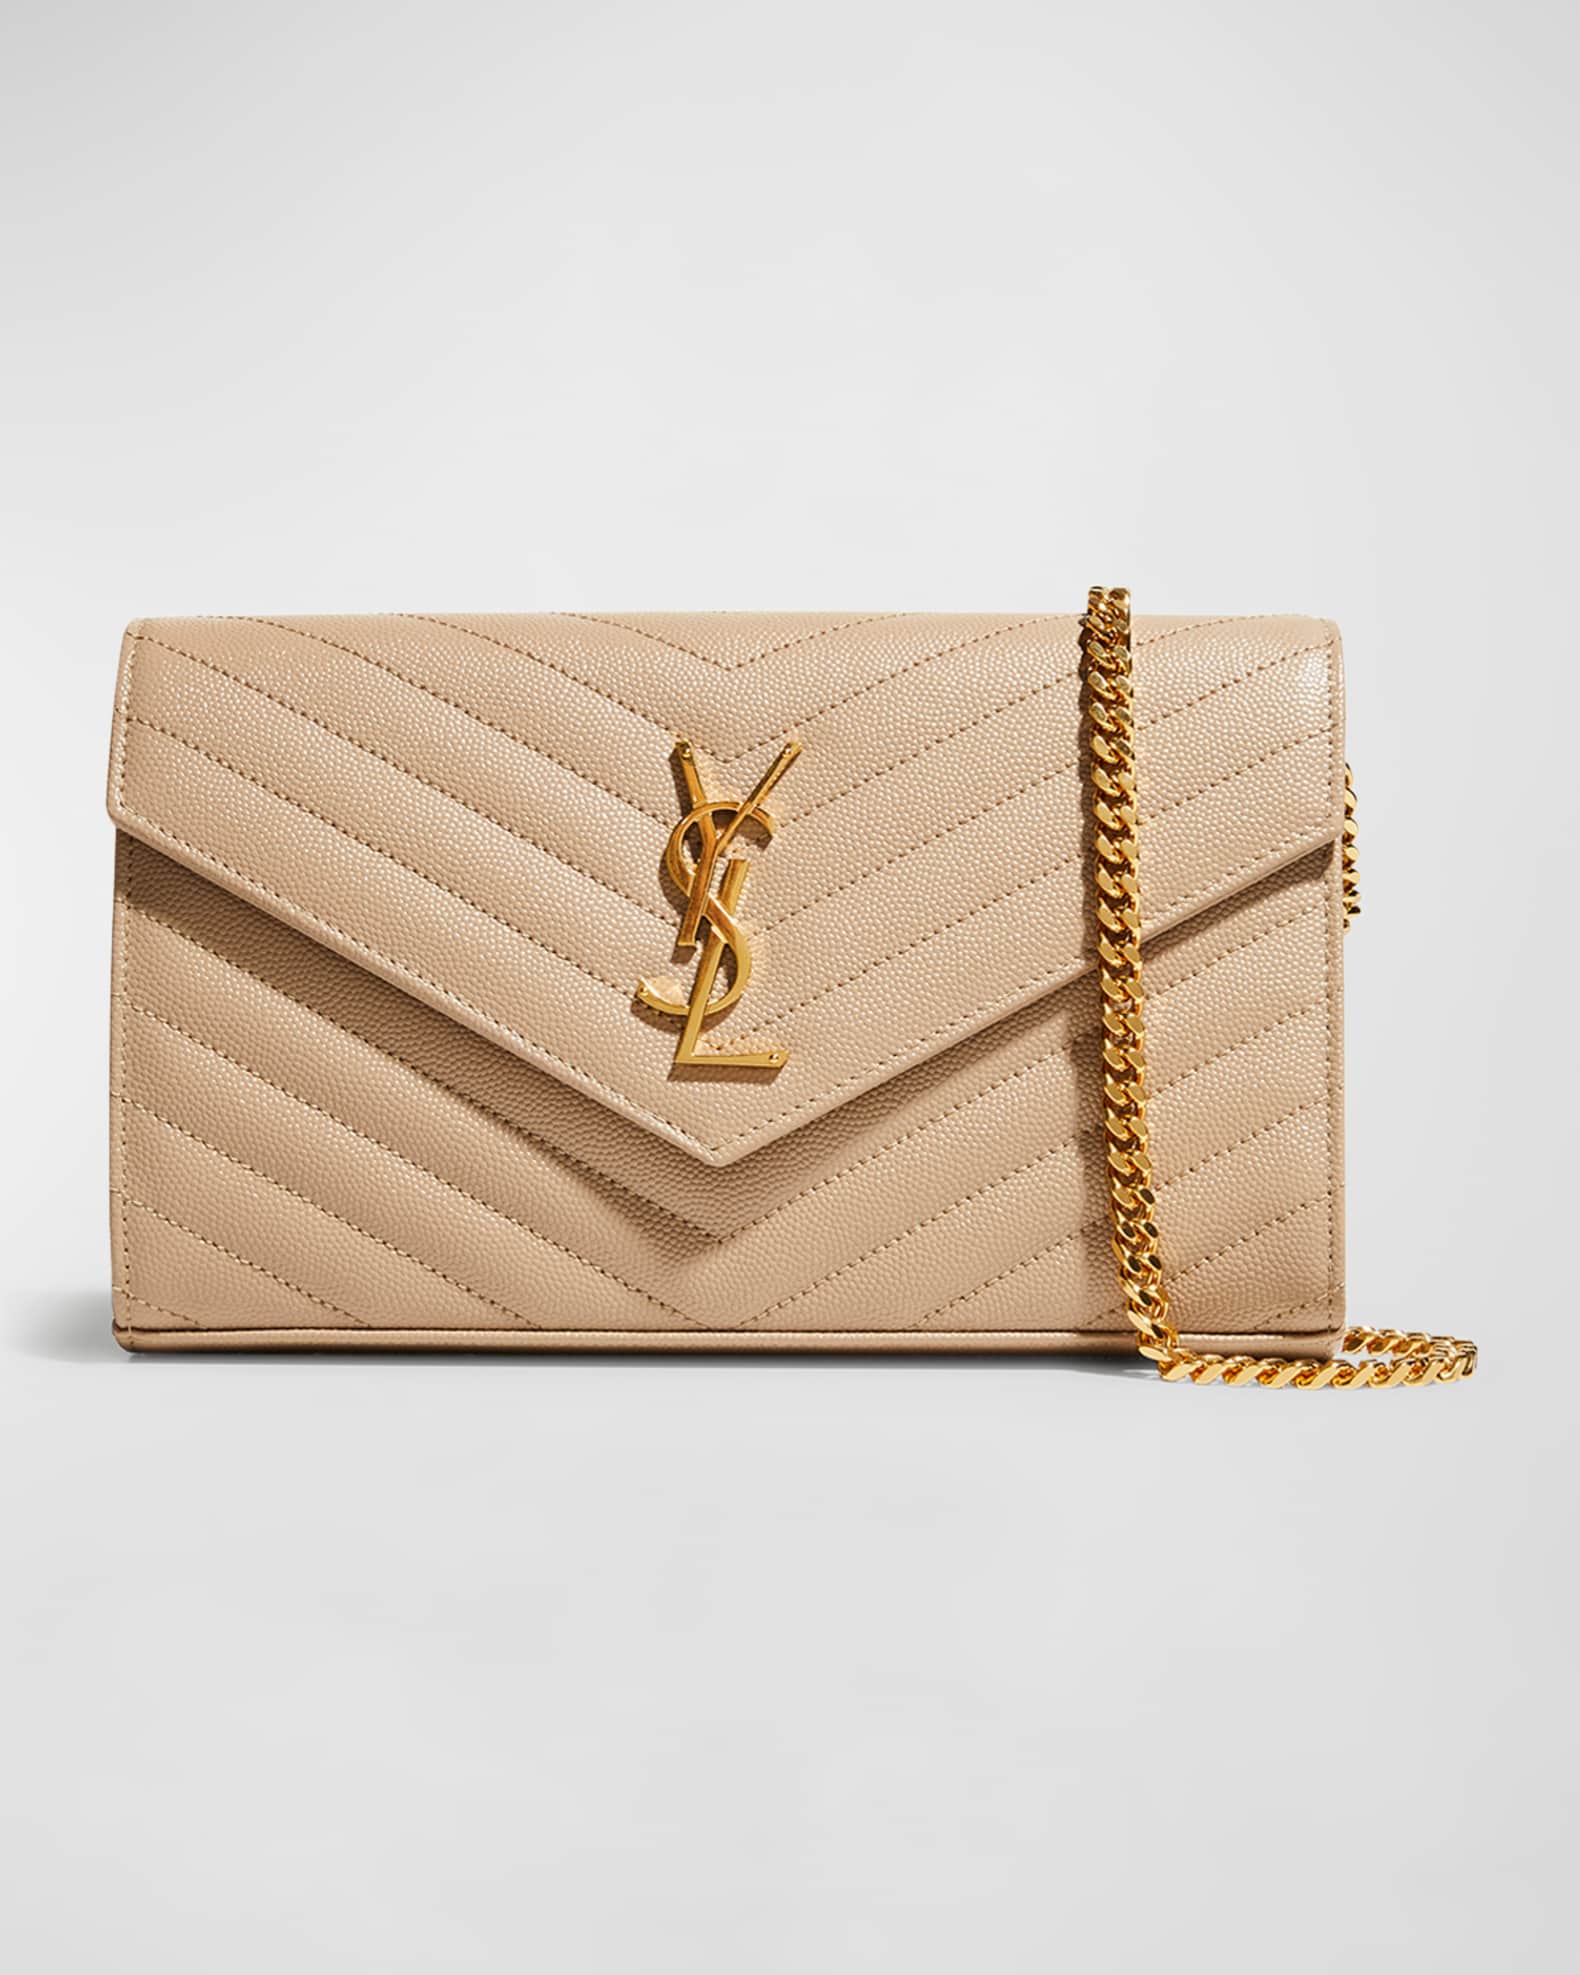 YSL Monogram Large Wallet on Chain in Grained Leather | Neiman Marcus